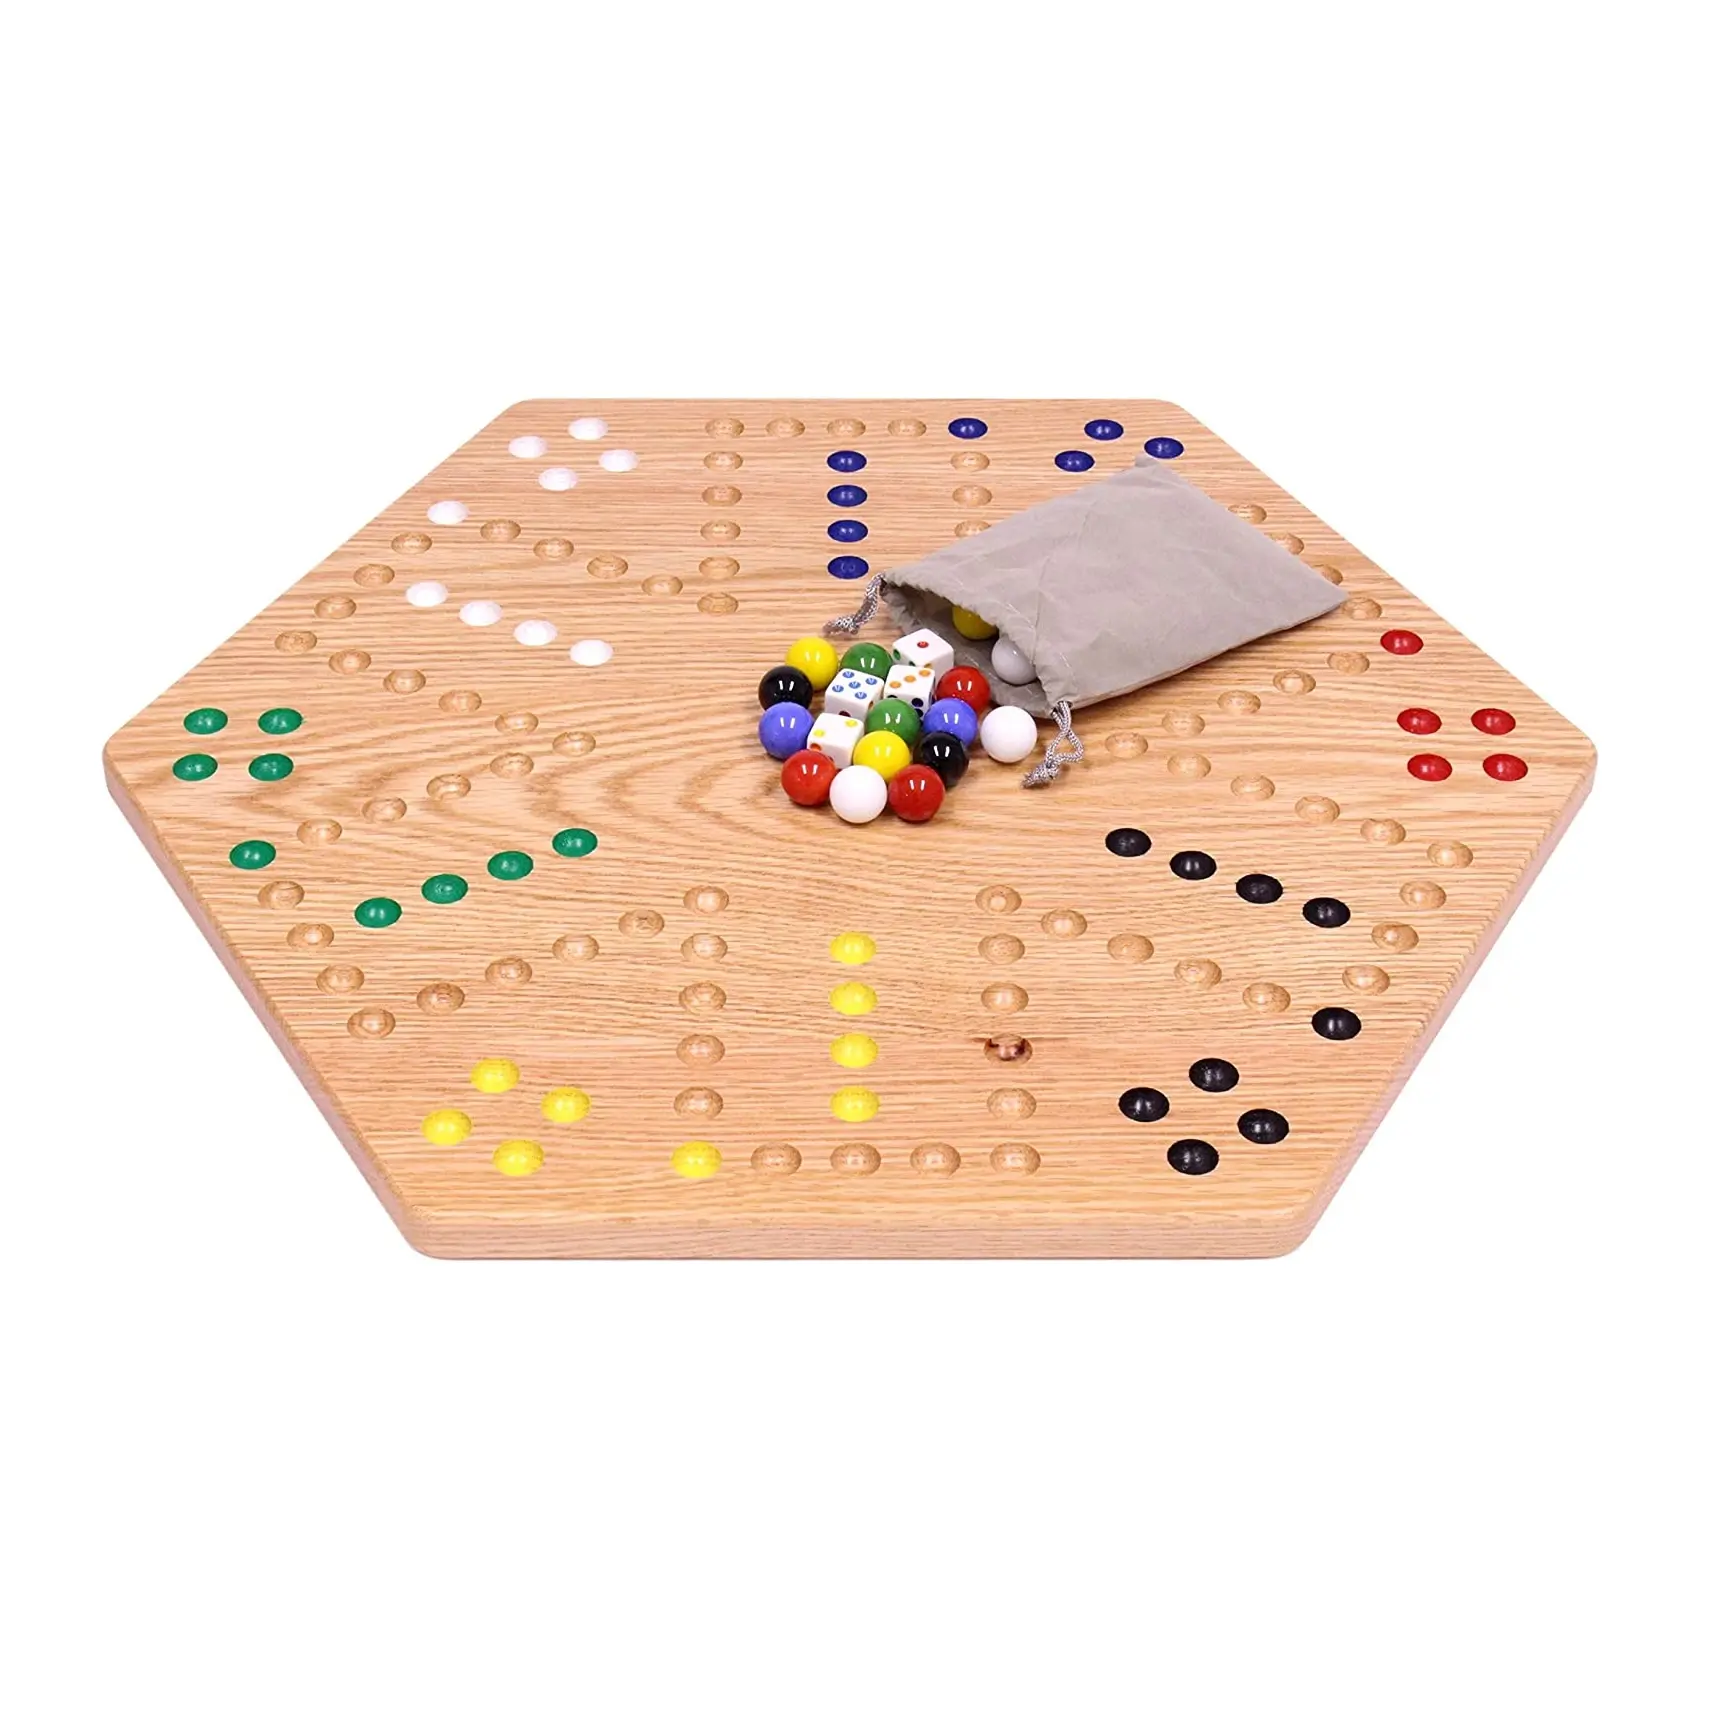 Wahoo Marble Game Board Set - 20" Wide - Solid Oak Wood - Double-Sided - with Large 18mm Marbles and Dice